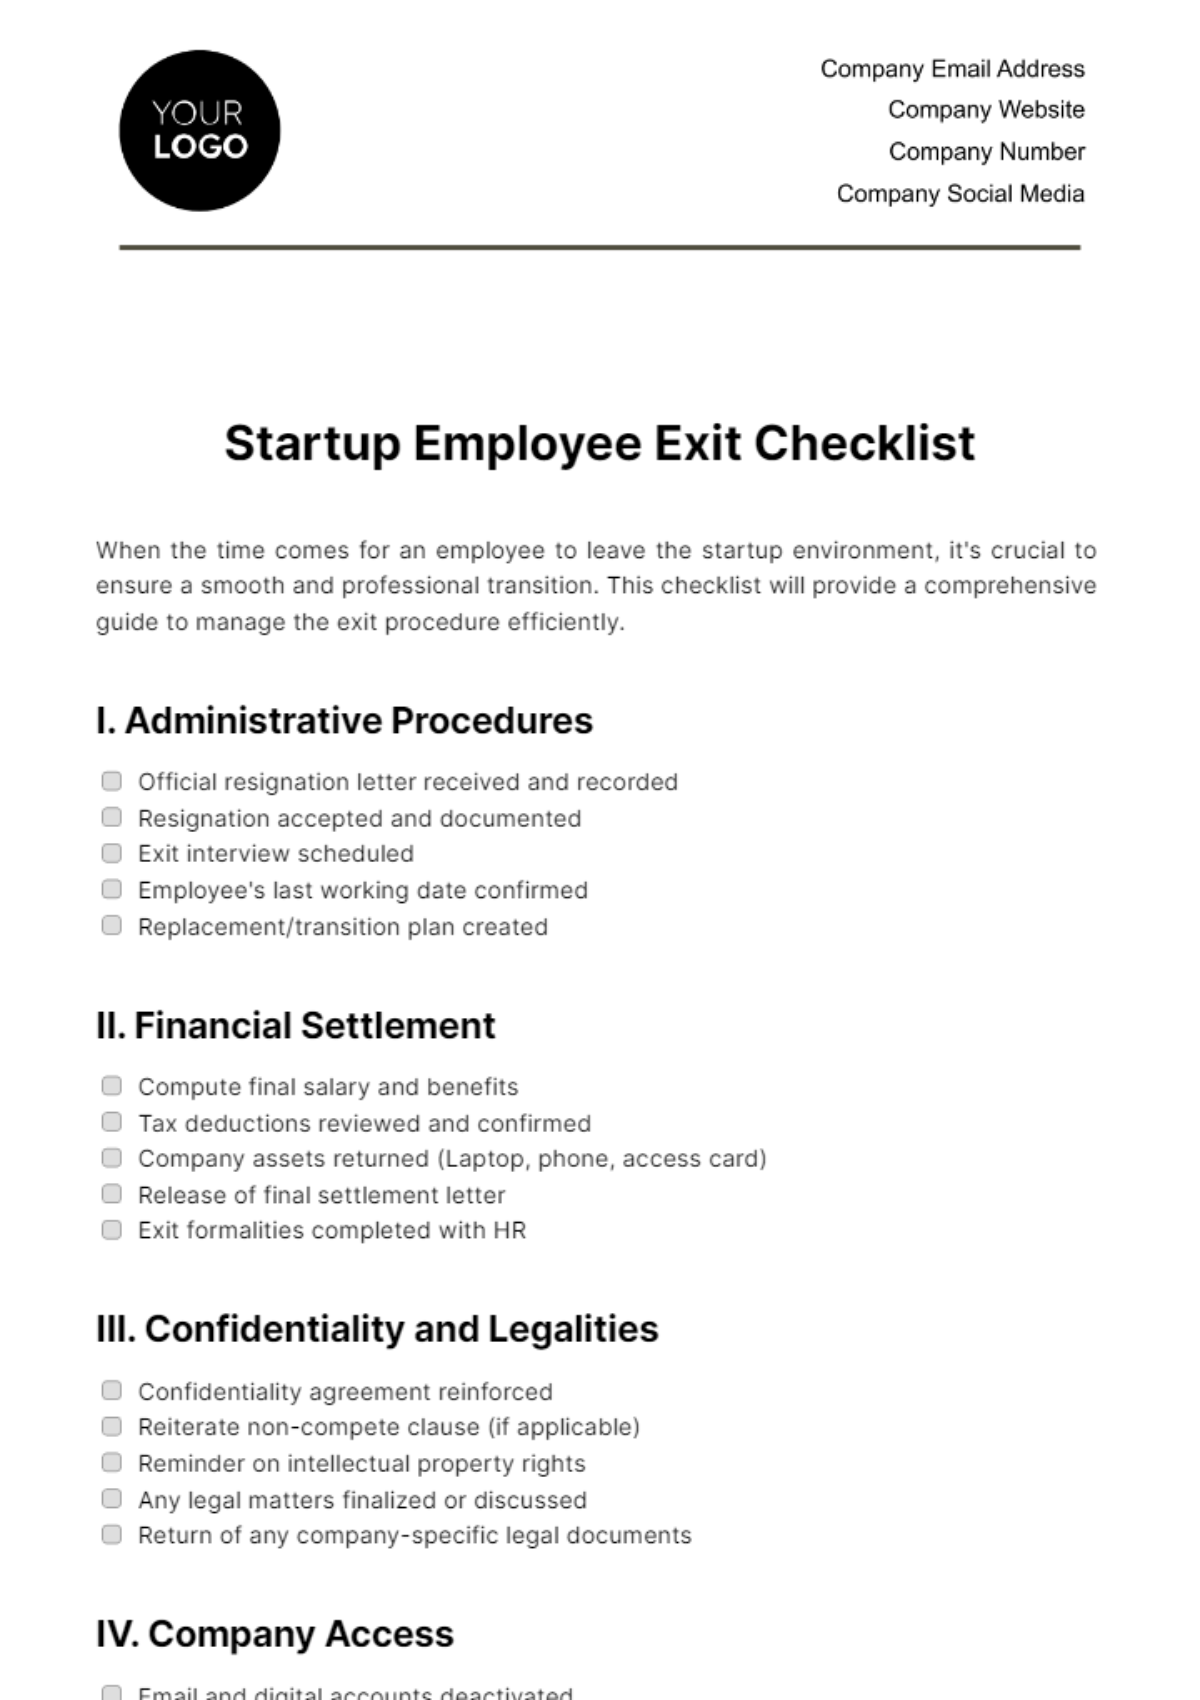 Free Startup Employee Exit Checklist Template